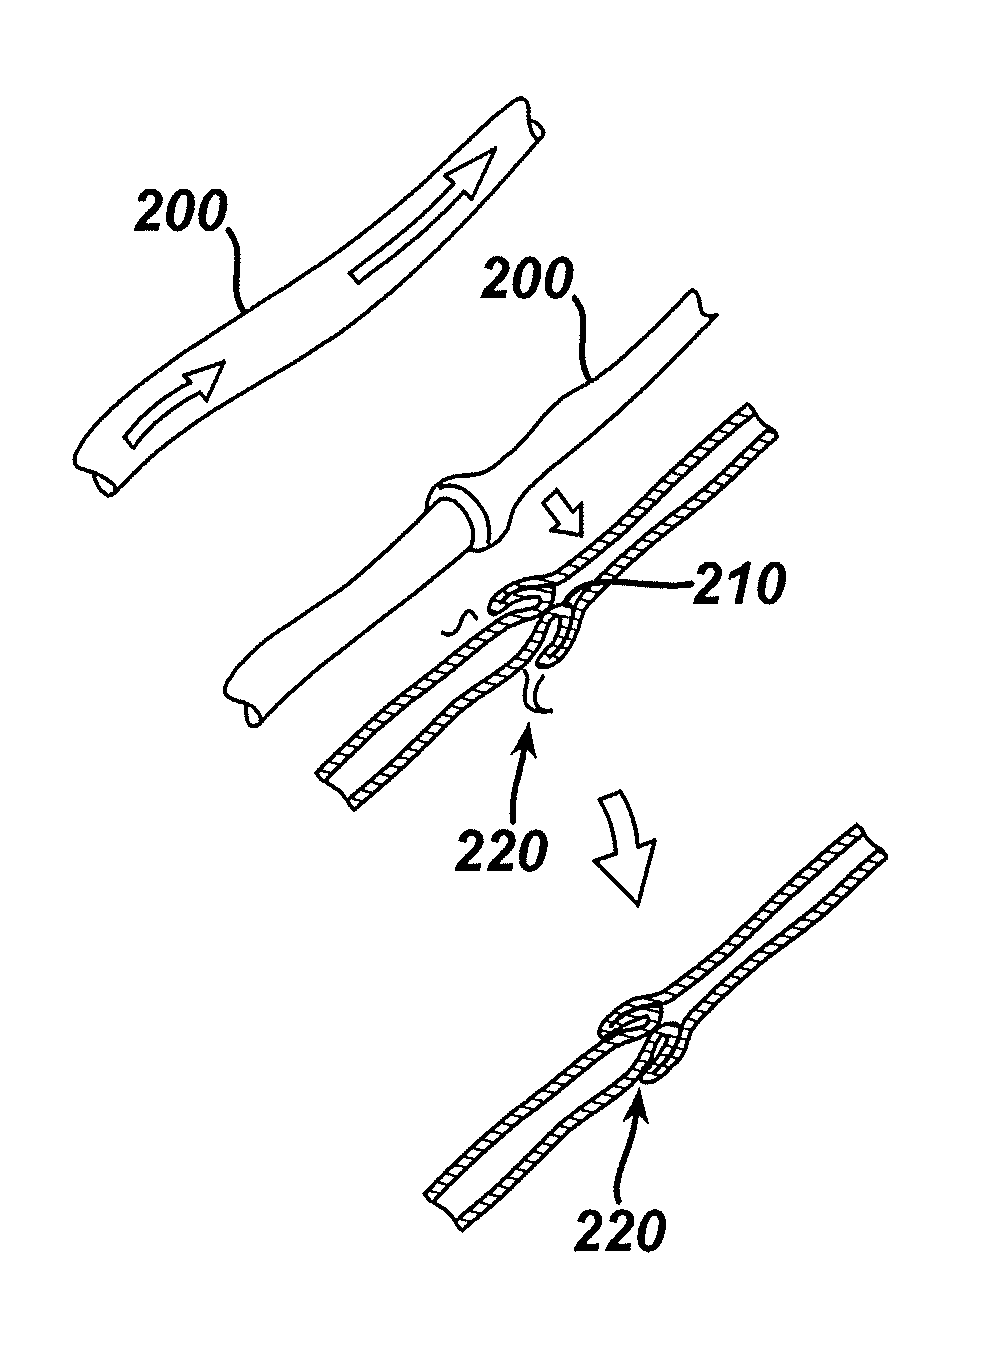 Method of Filling an Intraluminal Reservoir with a Therapeutic Substance